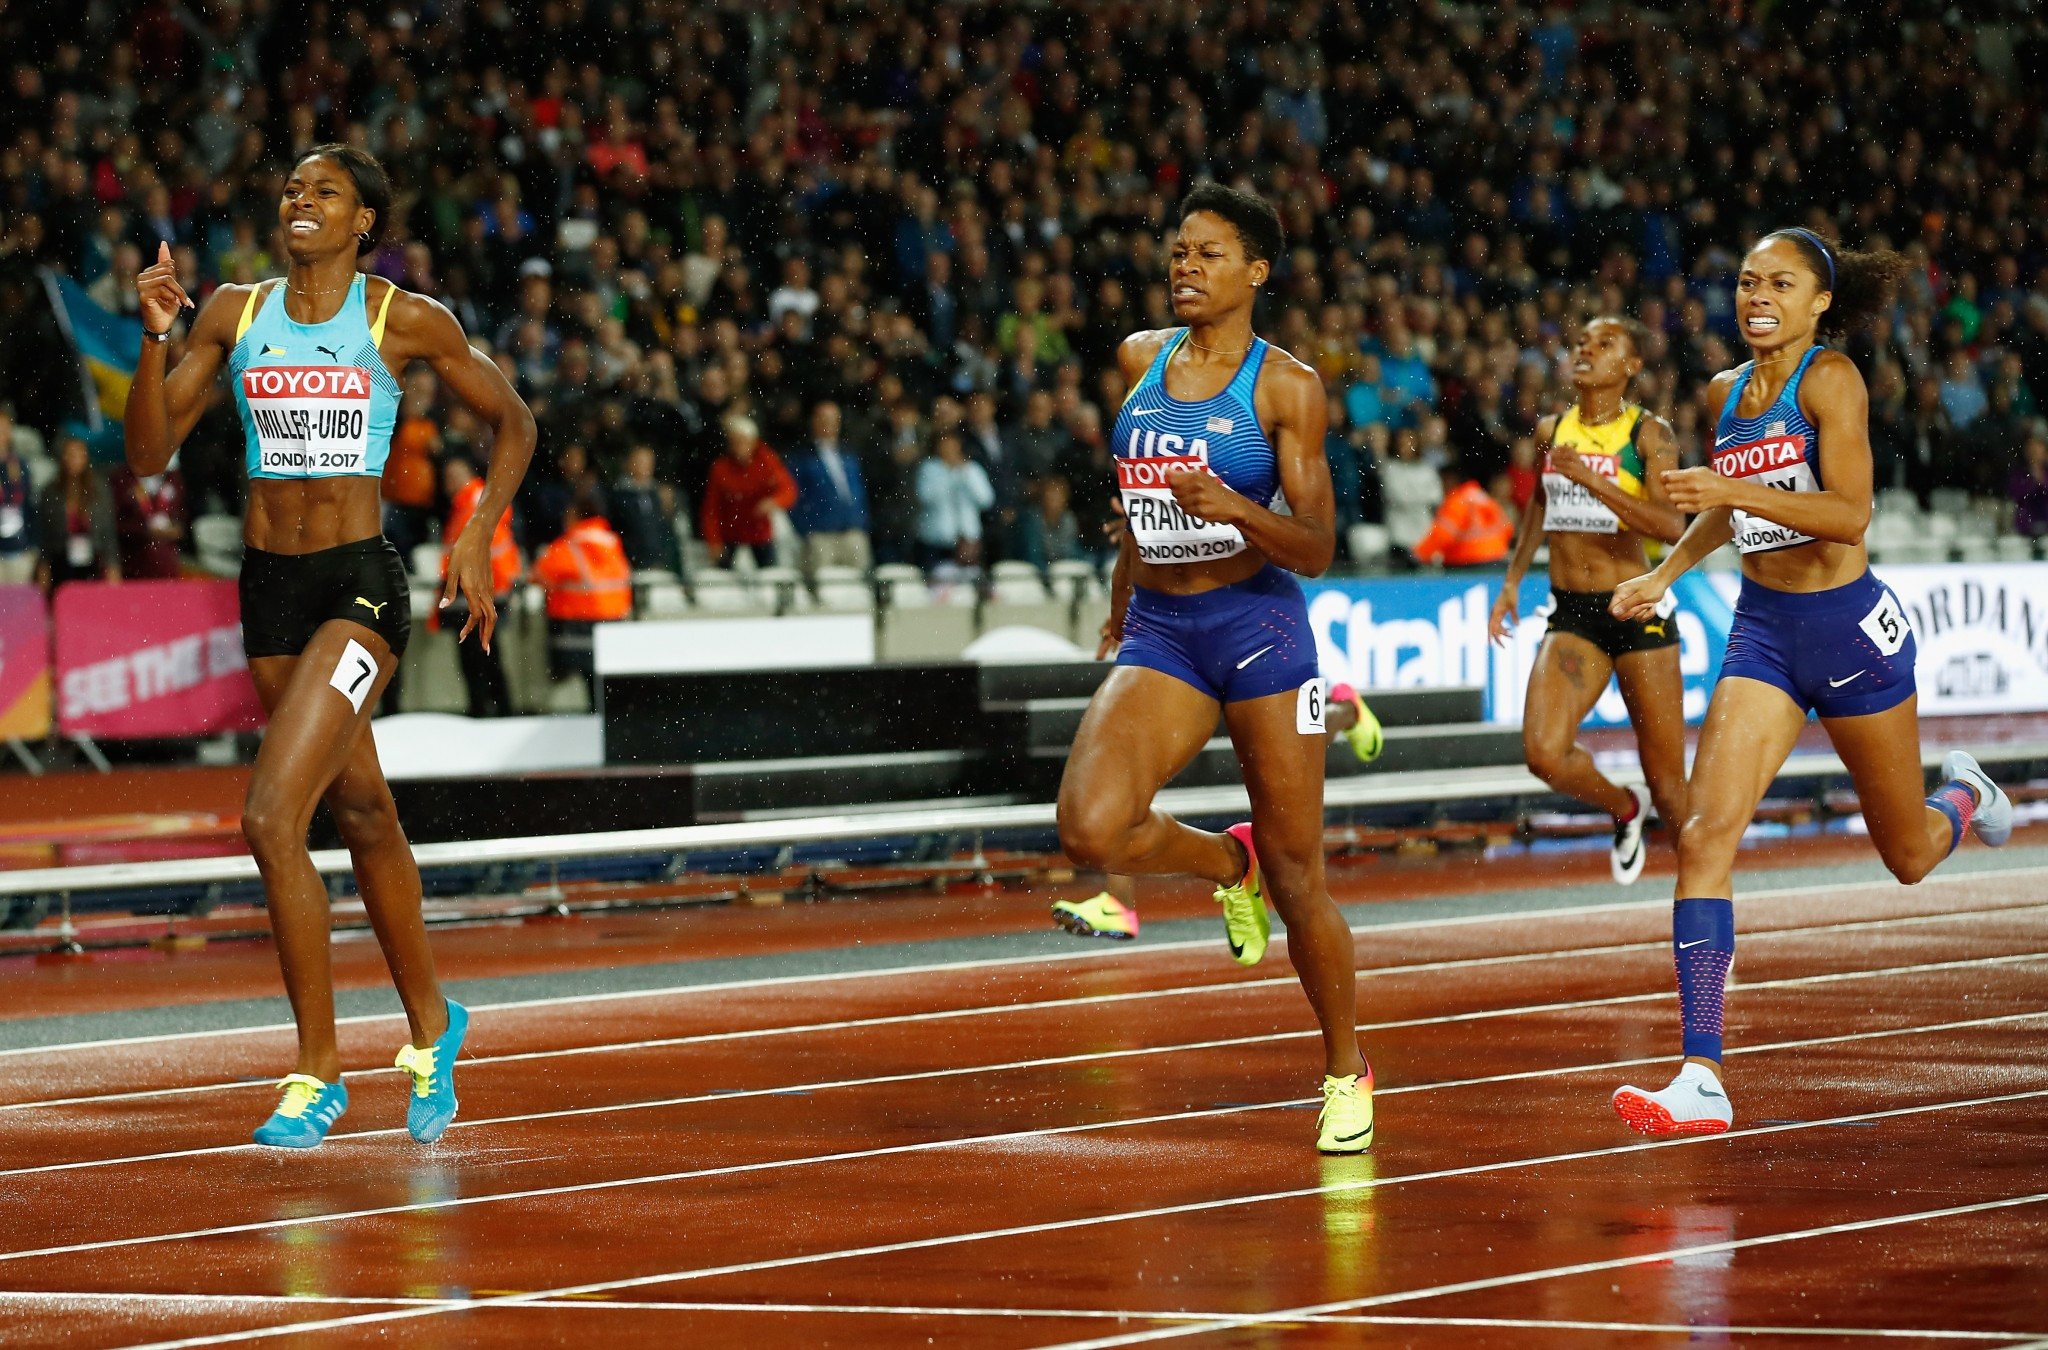 America's Phyllis Francis capitalised after Bahamians Shaunae Miller-Uibo, left, lost all momentum ©Getty Images